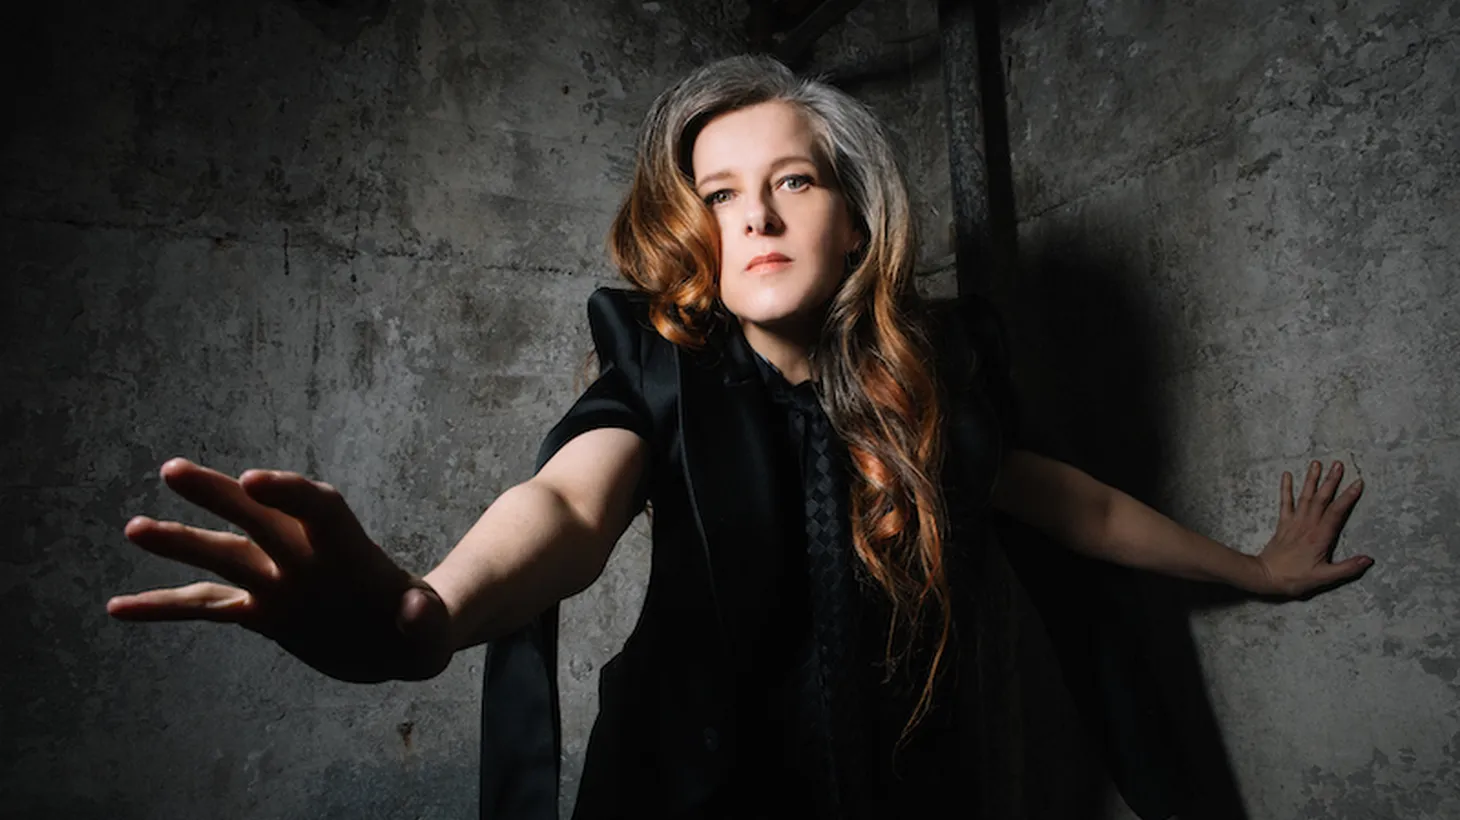 With two decades of solo outputs under her belt, Neko Case presents a digital-only career retrospective of her oeuvre called “Wild Creatures.” Fearless and inventive, Case sings with abandon on her latest song that sounds classic, “Oh, Shadowless.”